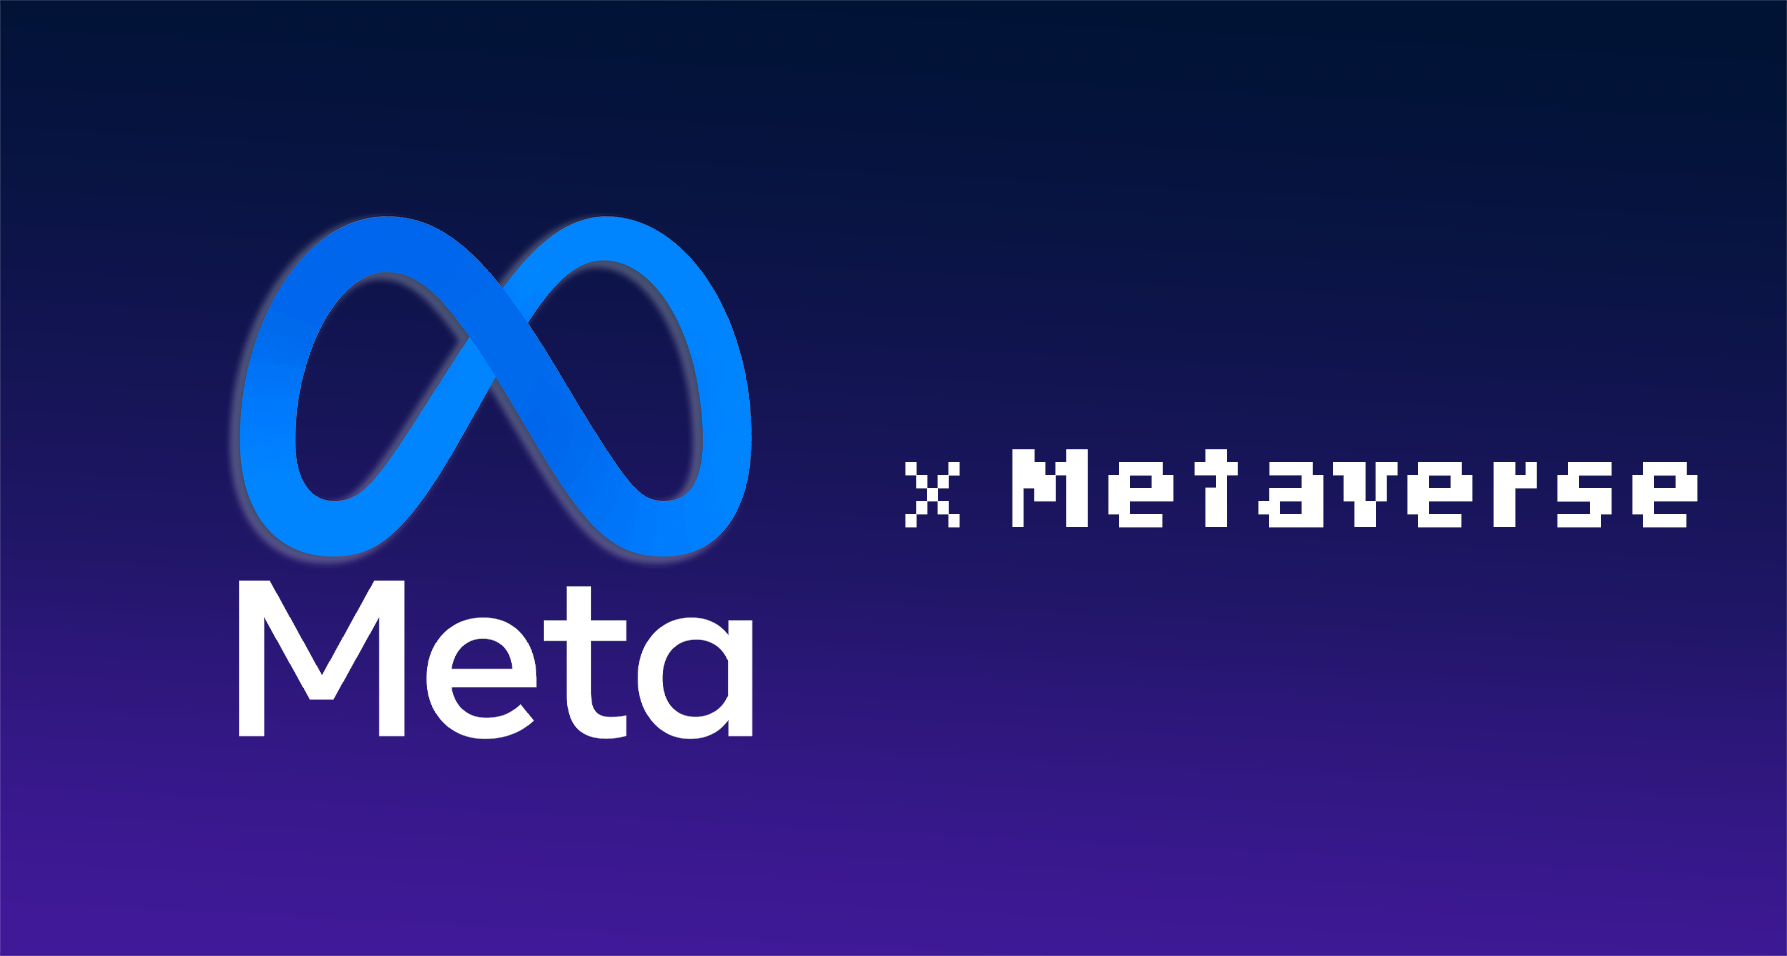 What is the Meta’s Metaverse?